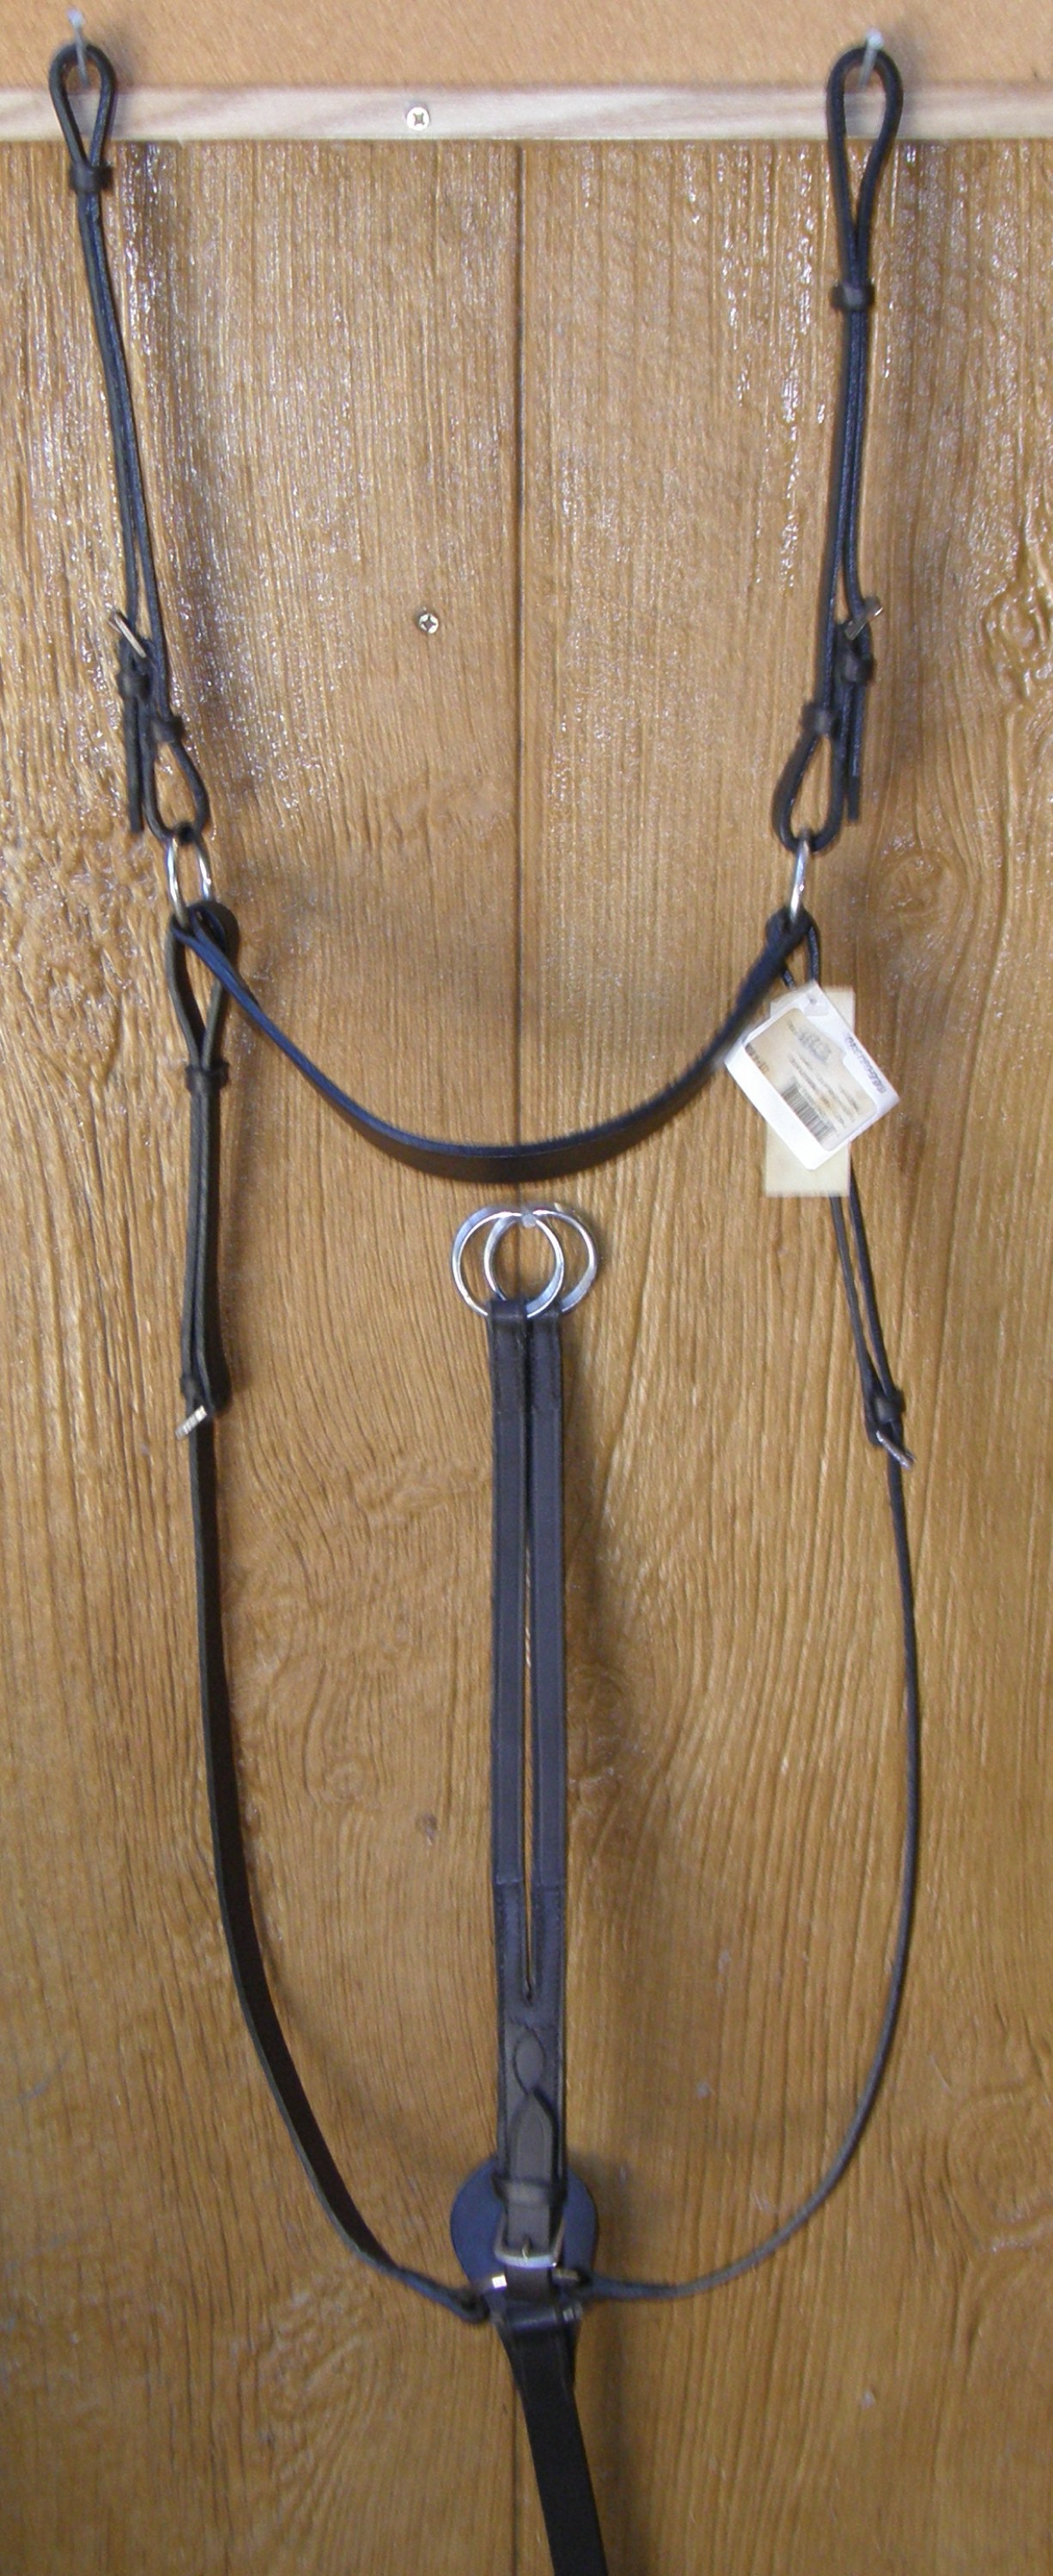 Patterdale Leather English Breastplate Breast Plate with Buckle In Running Martingale Attachment